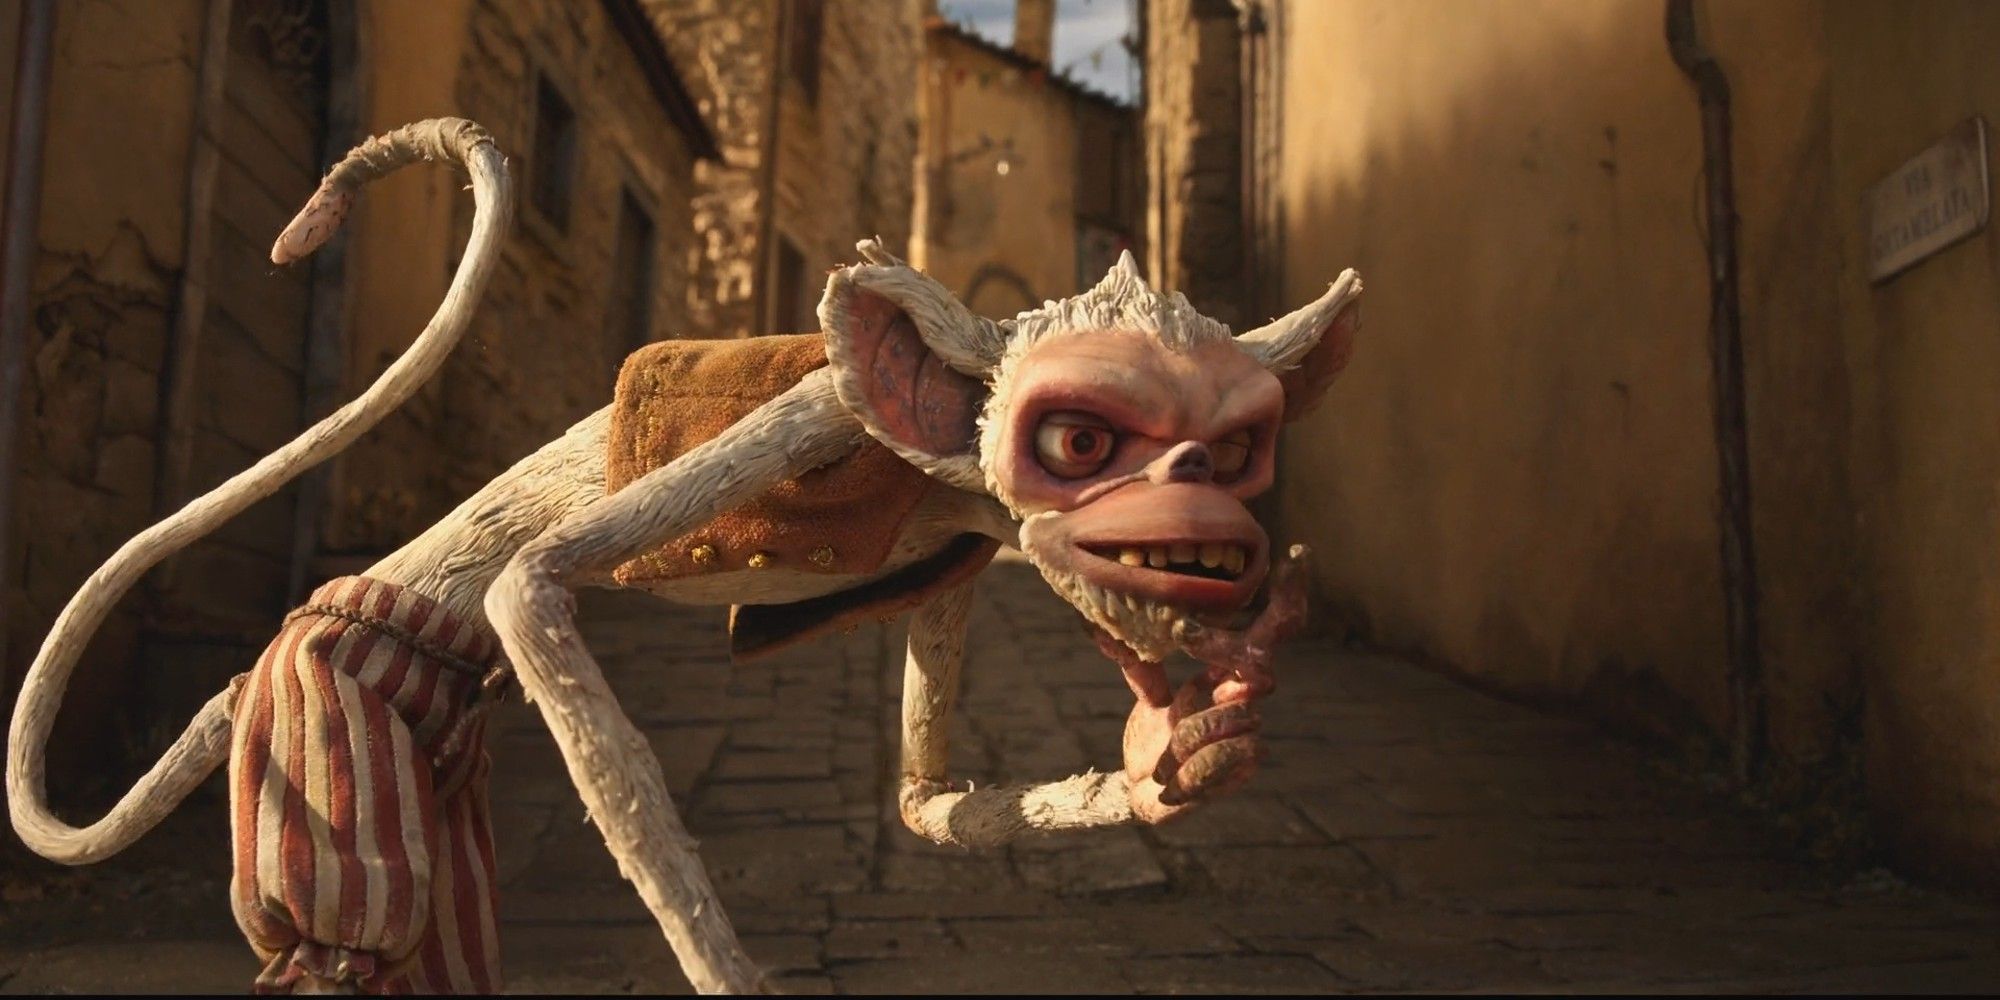 Spazzatura the monkey gives a mischievous look in Guillermo del Toro's Pinocchio